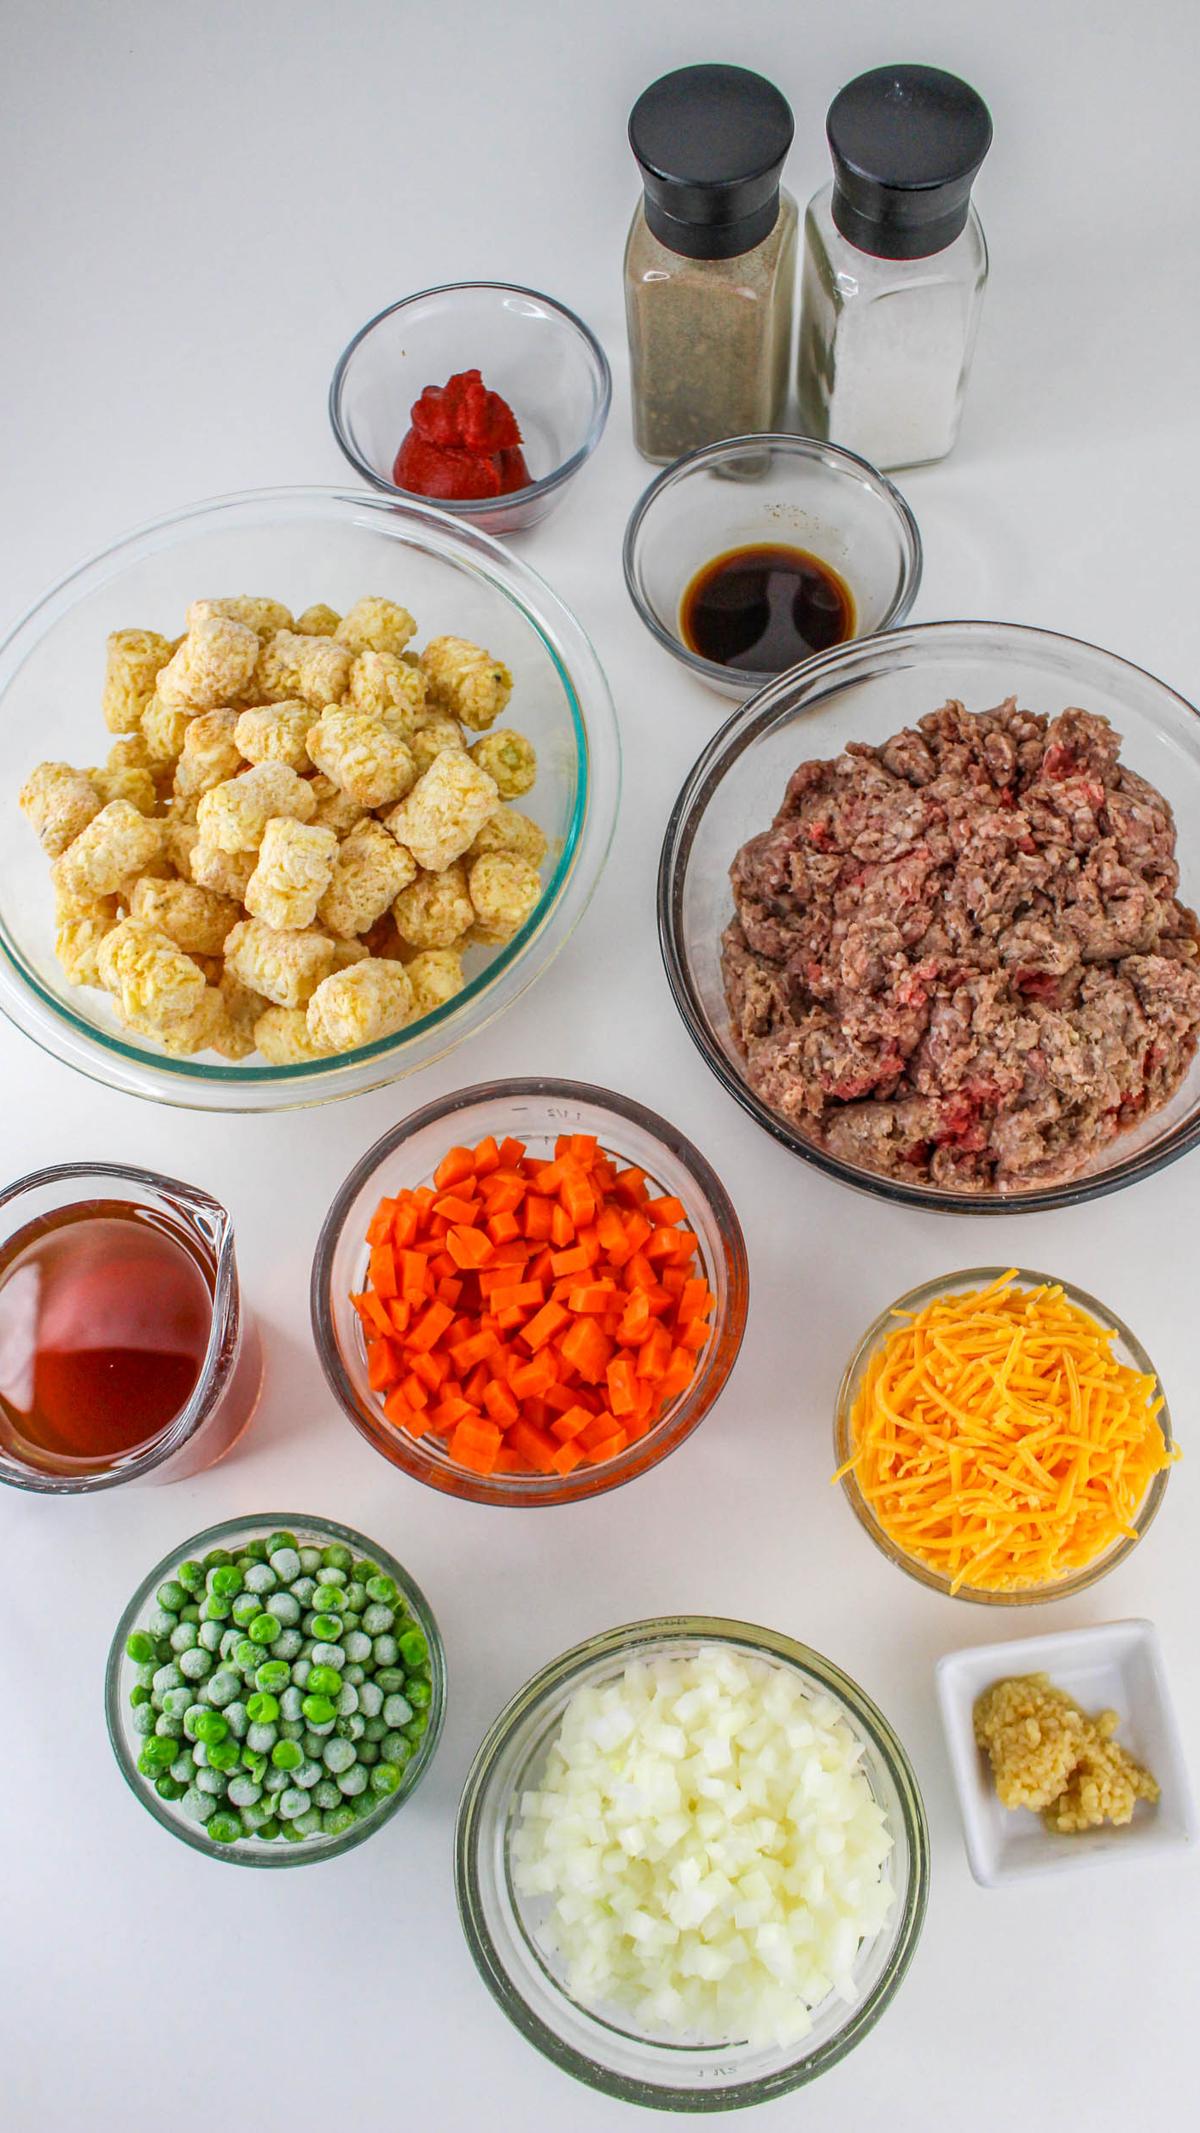 Ingredients for shepherds pie with tater tots.